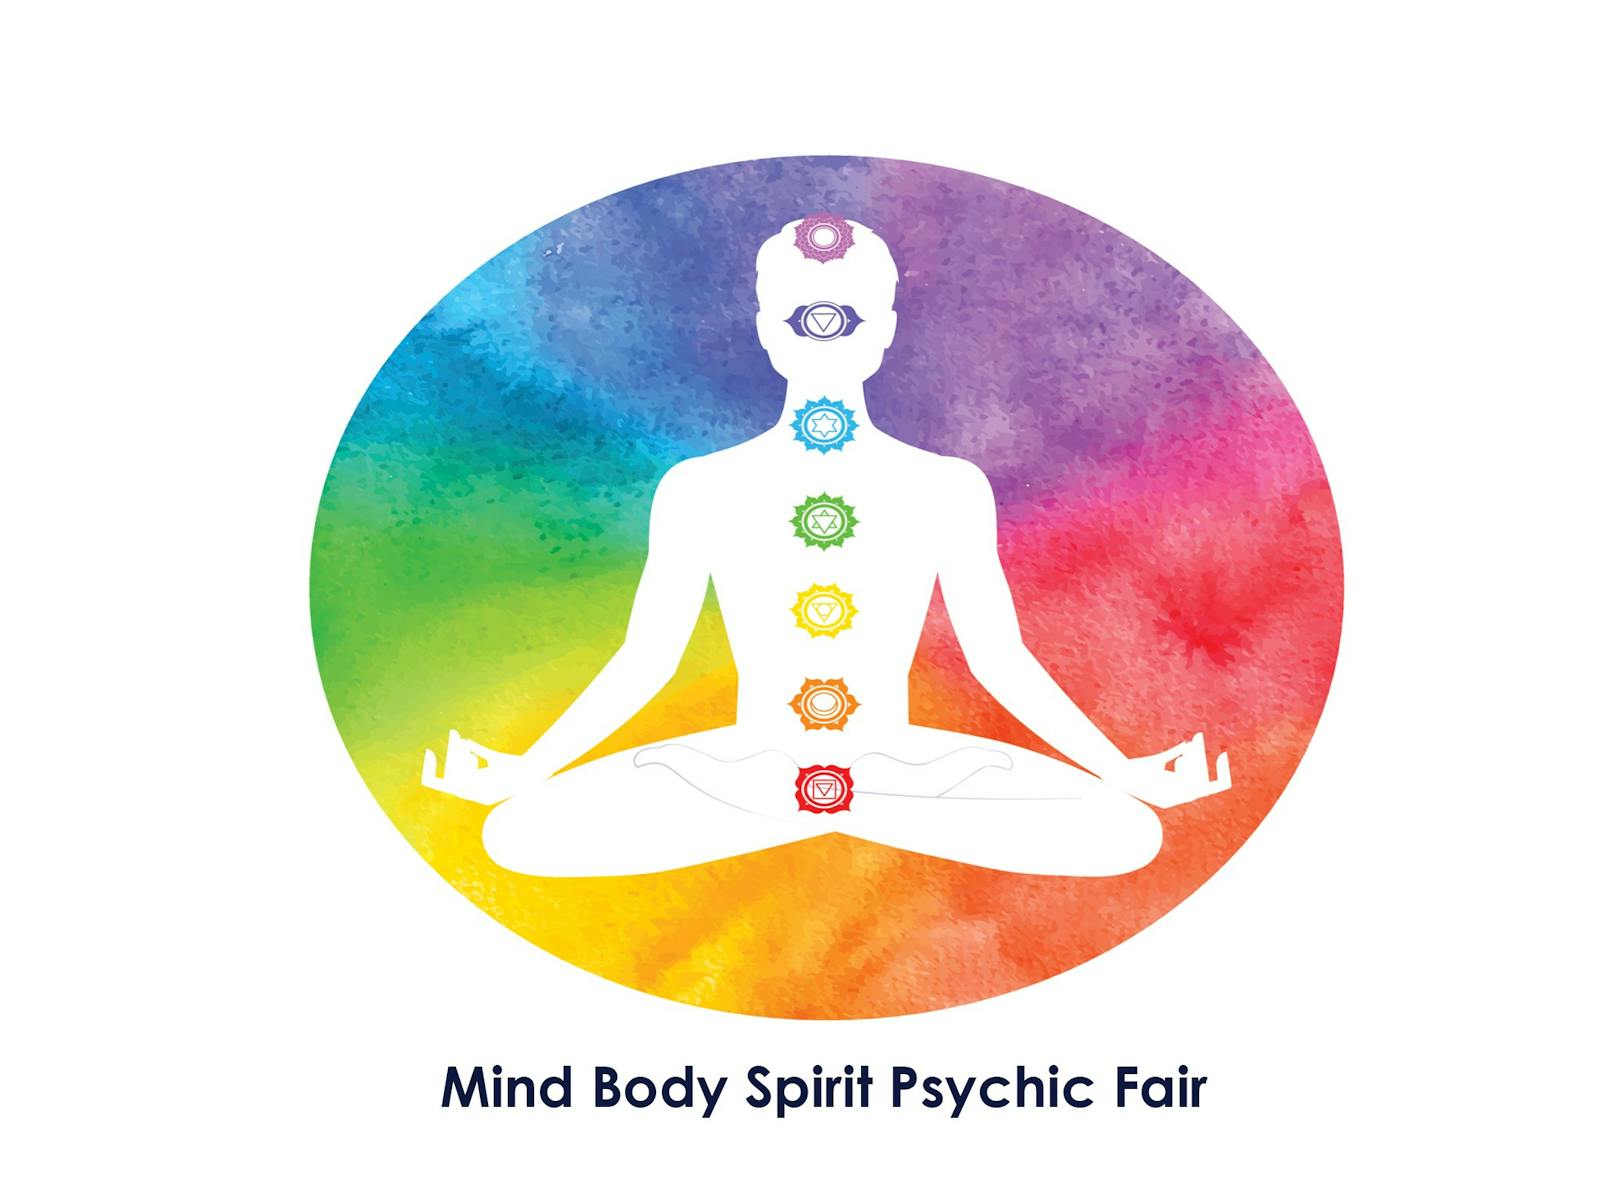 Image for Connections Natural Therapies, Psychics and Gifts Fair